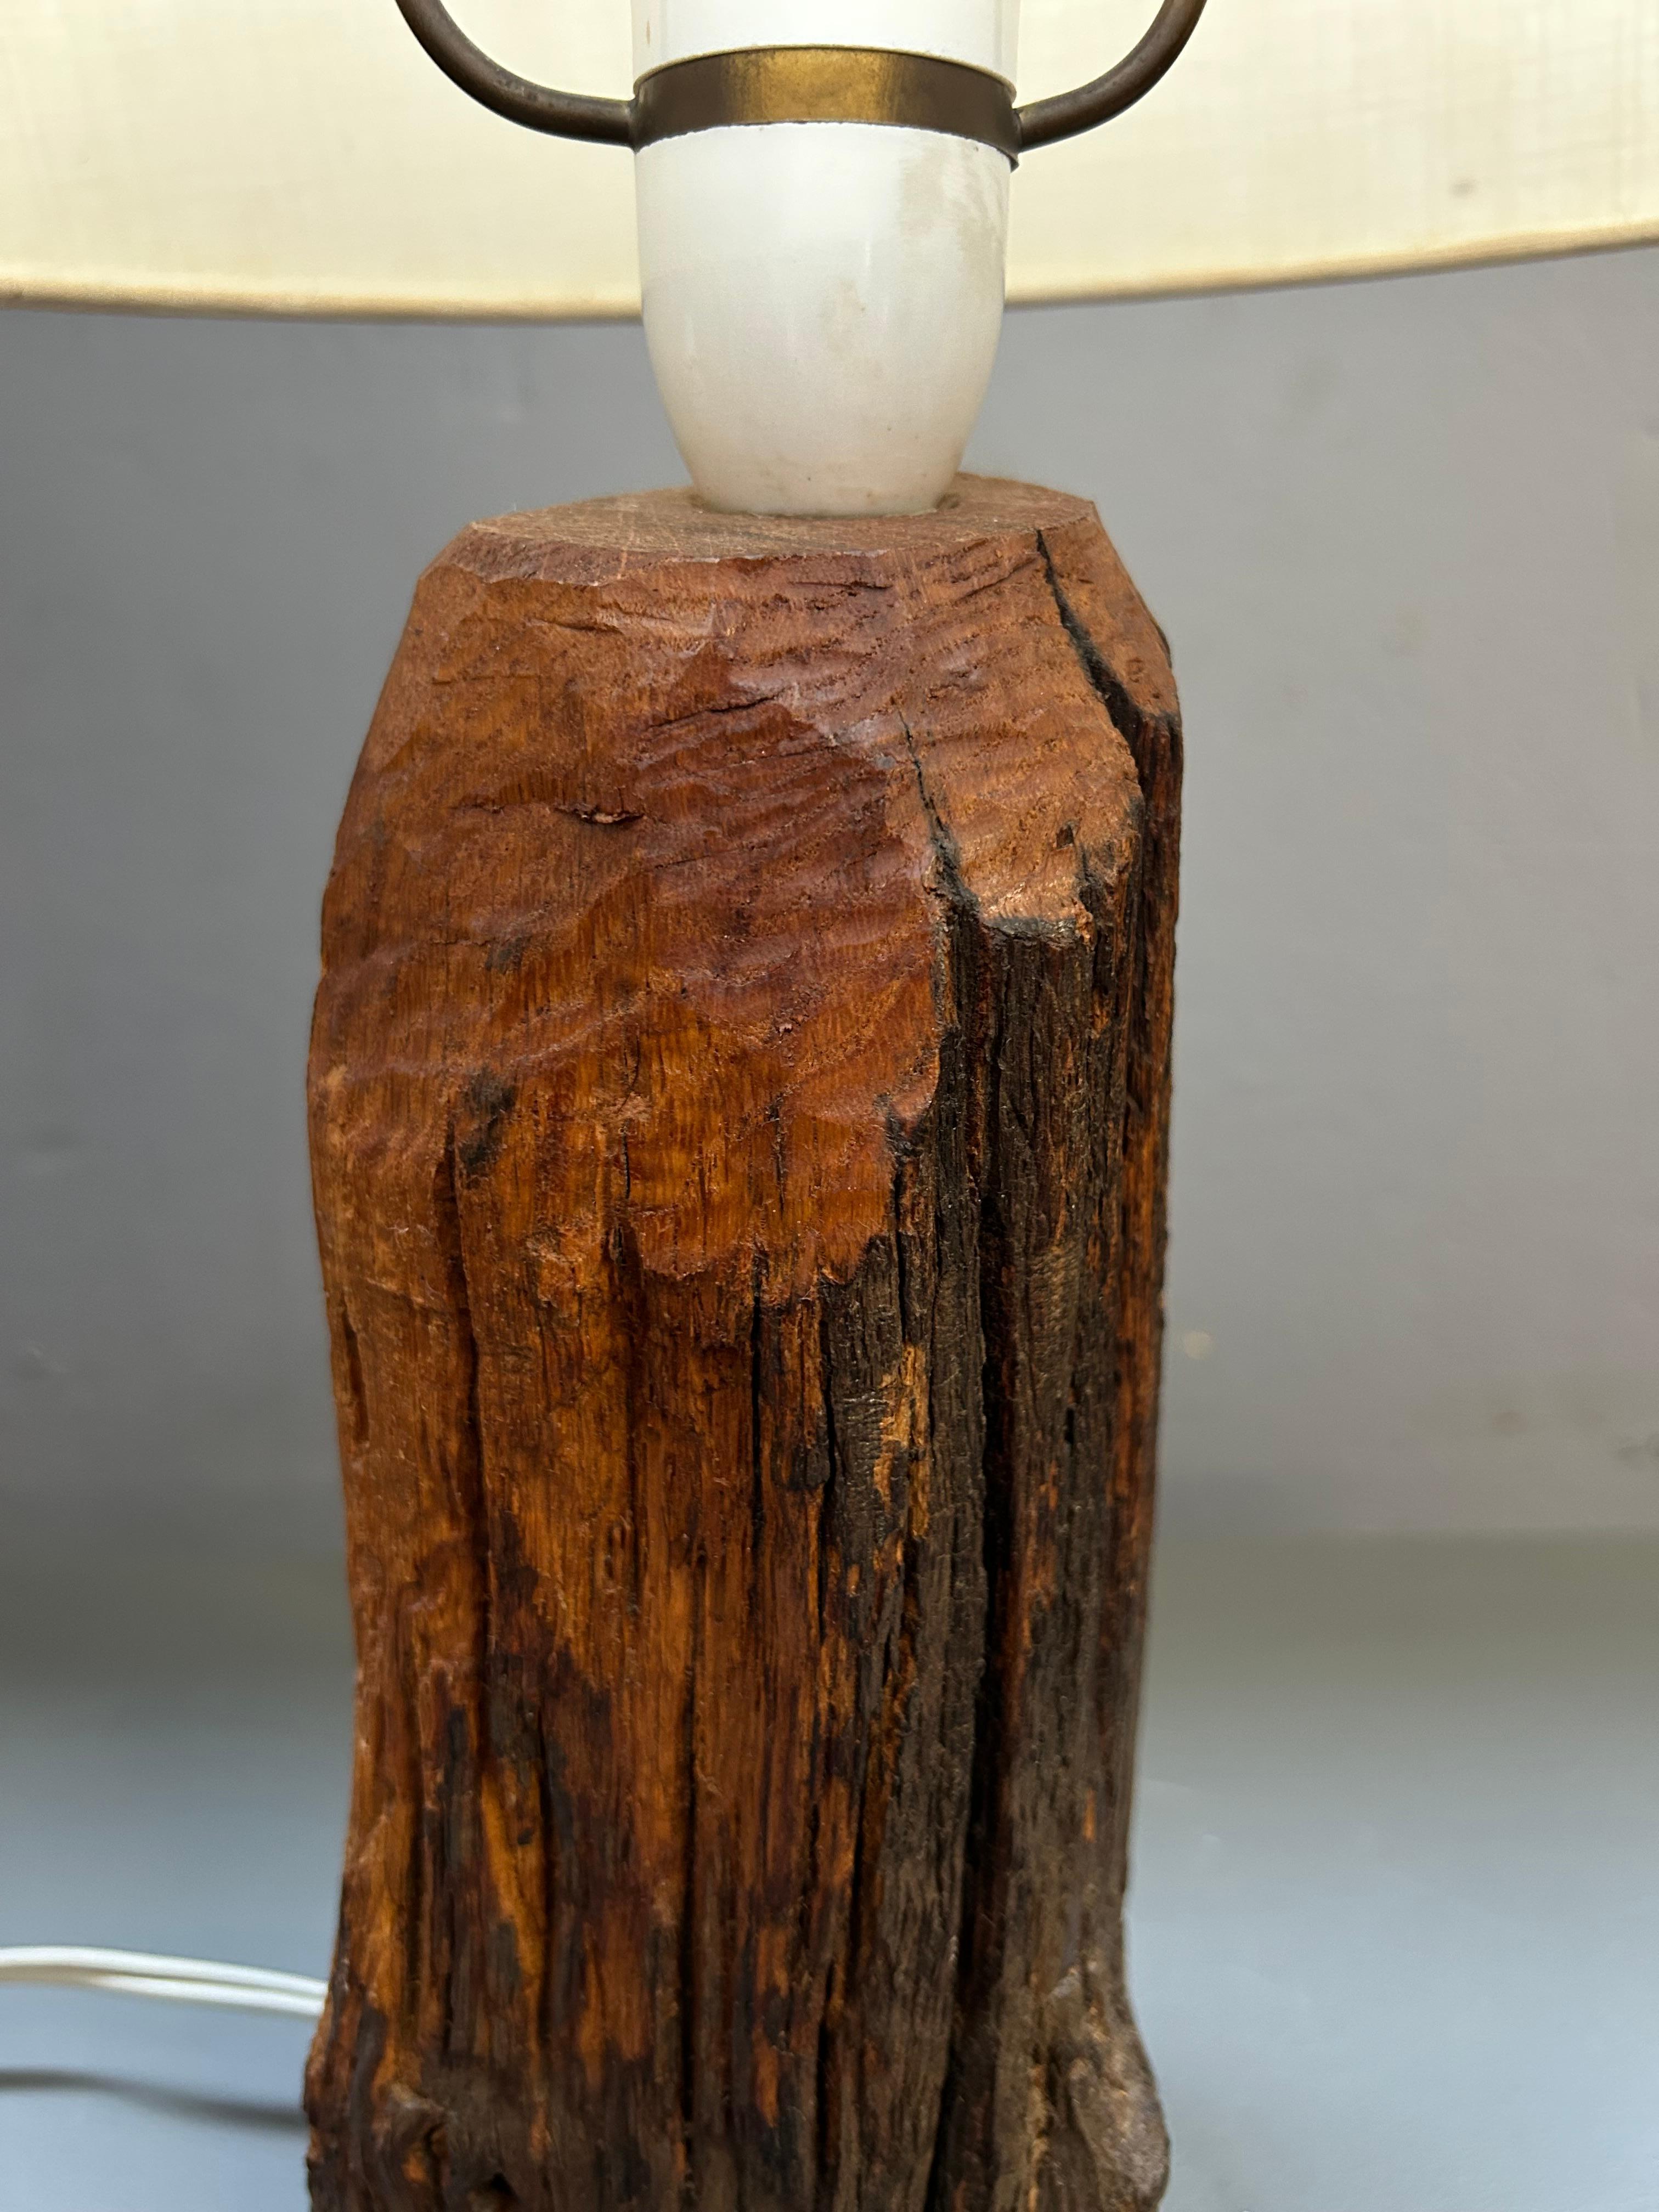 Rare and unique organic brutalist wooden table lamp made in Sweden in the 1970’s by a very skilled craftsman.

The lamp is in good original condition with a beautiful natural patina and the original bulb socket and wire.

The lamp is very delicate